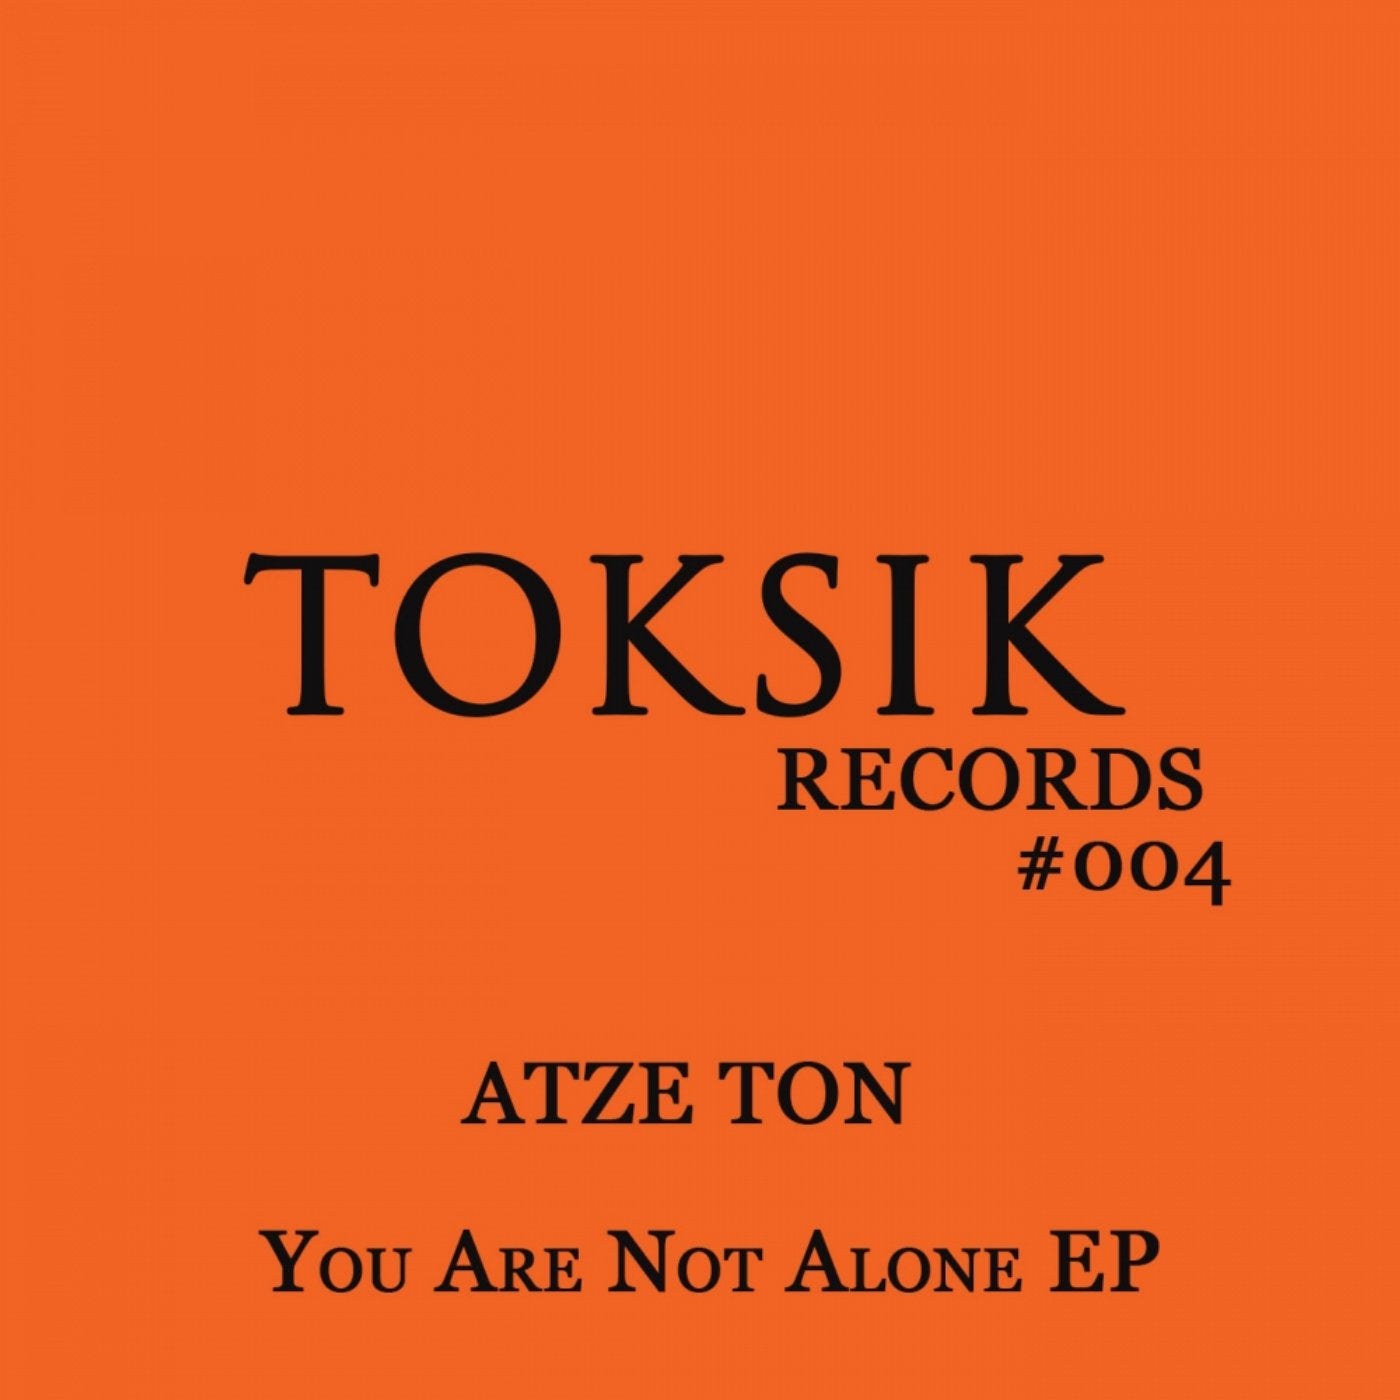 You Are Not Alone EP